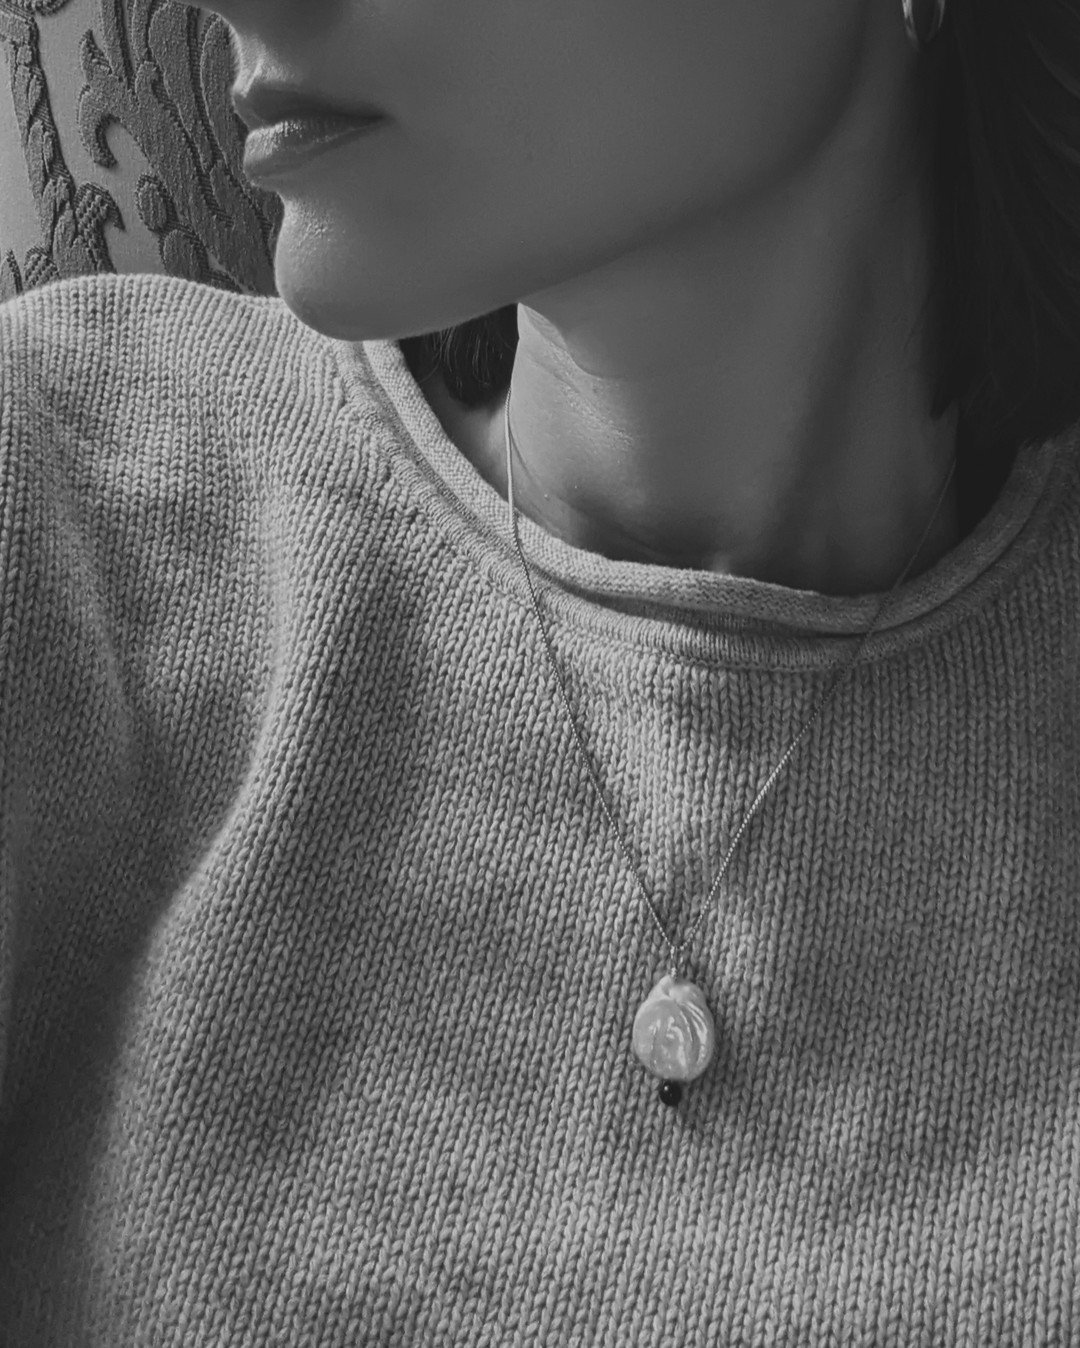 Wore the Pearl Amulet Necklace nearly every day of my honeymoon. Love the look of this necklace with a crewneck sweater 🖤